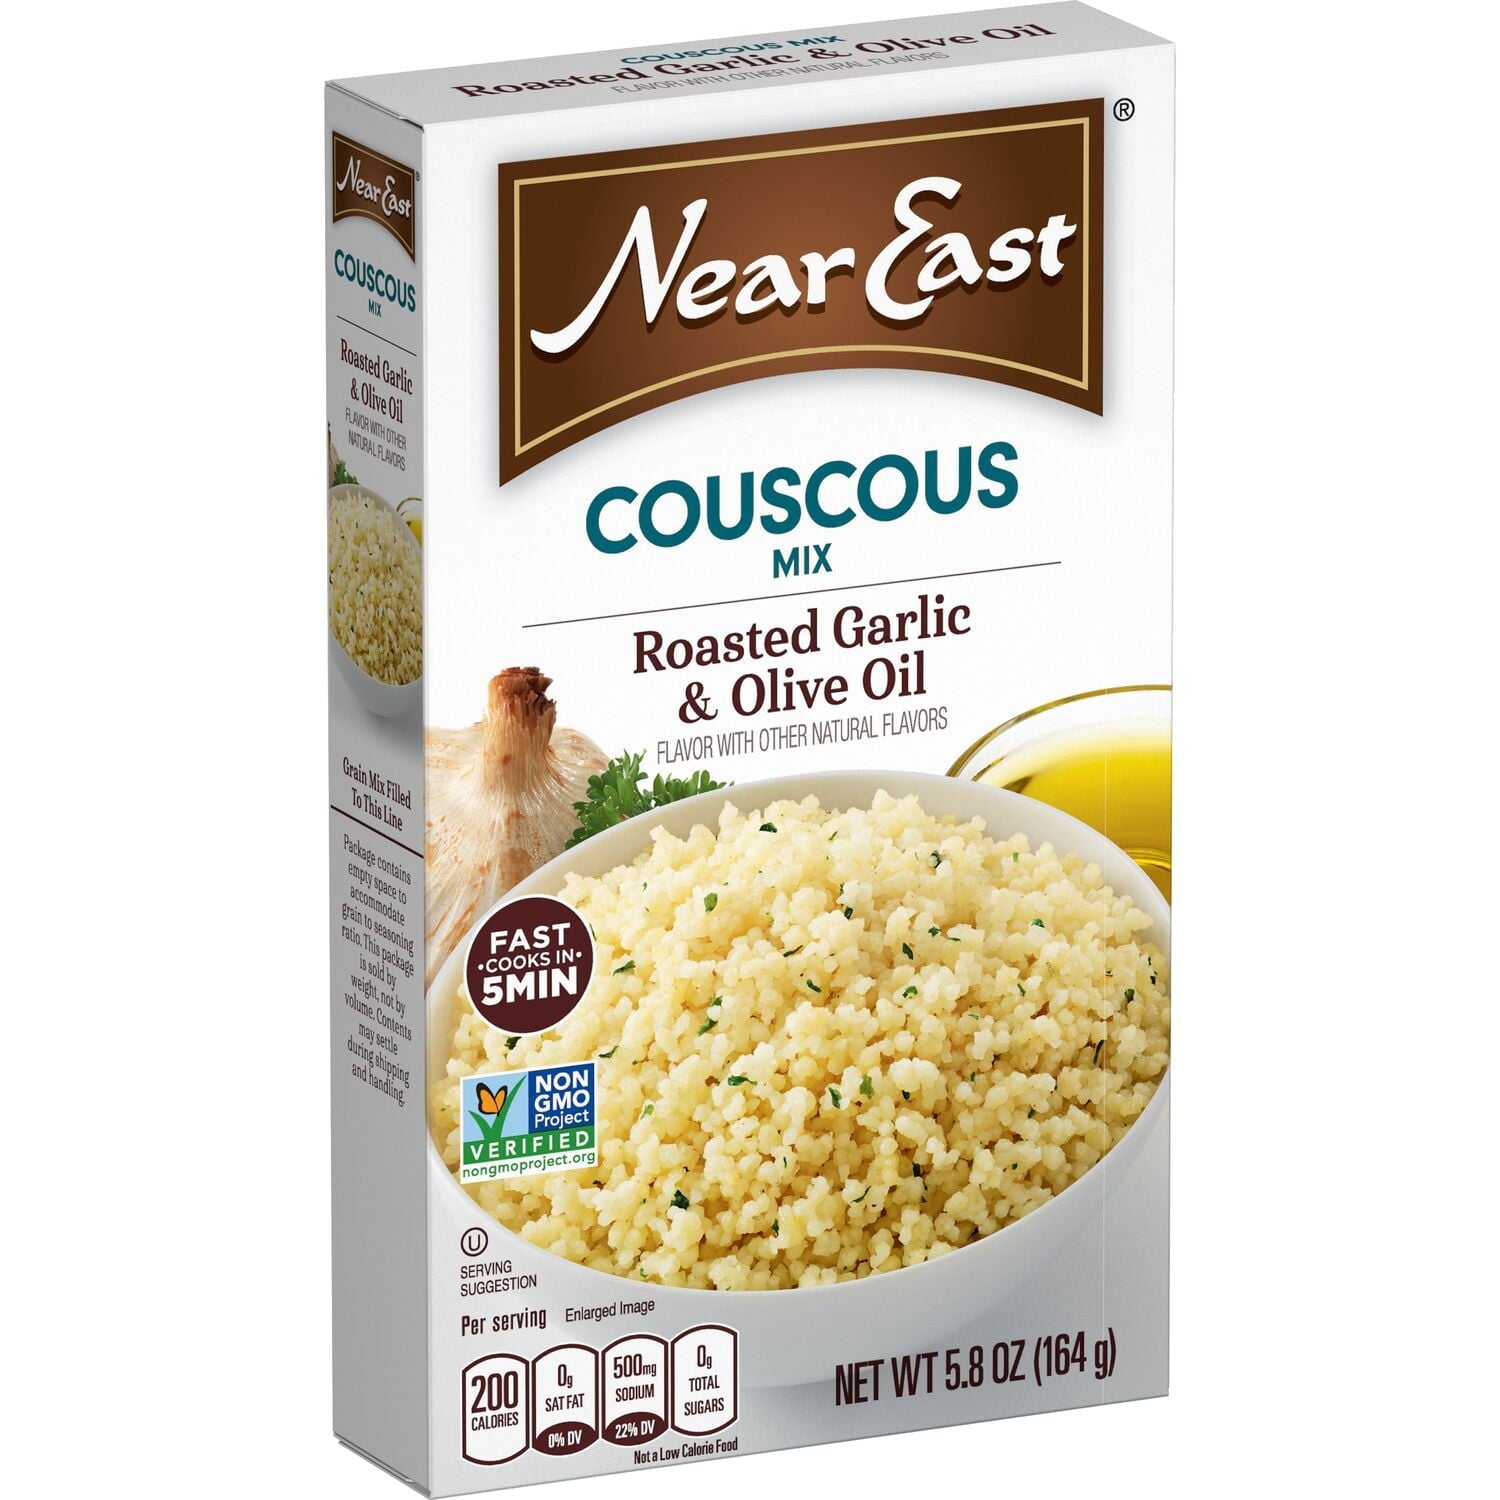 Near East Roasted Garlic & Olive Oil Couscous 5.8 Oz